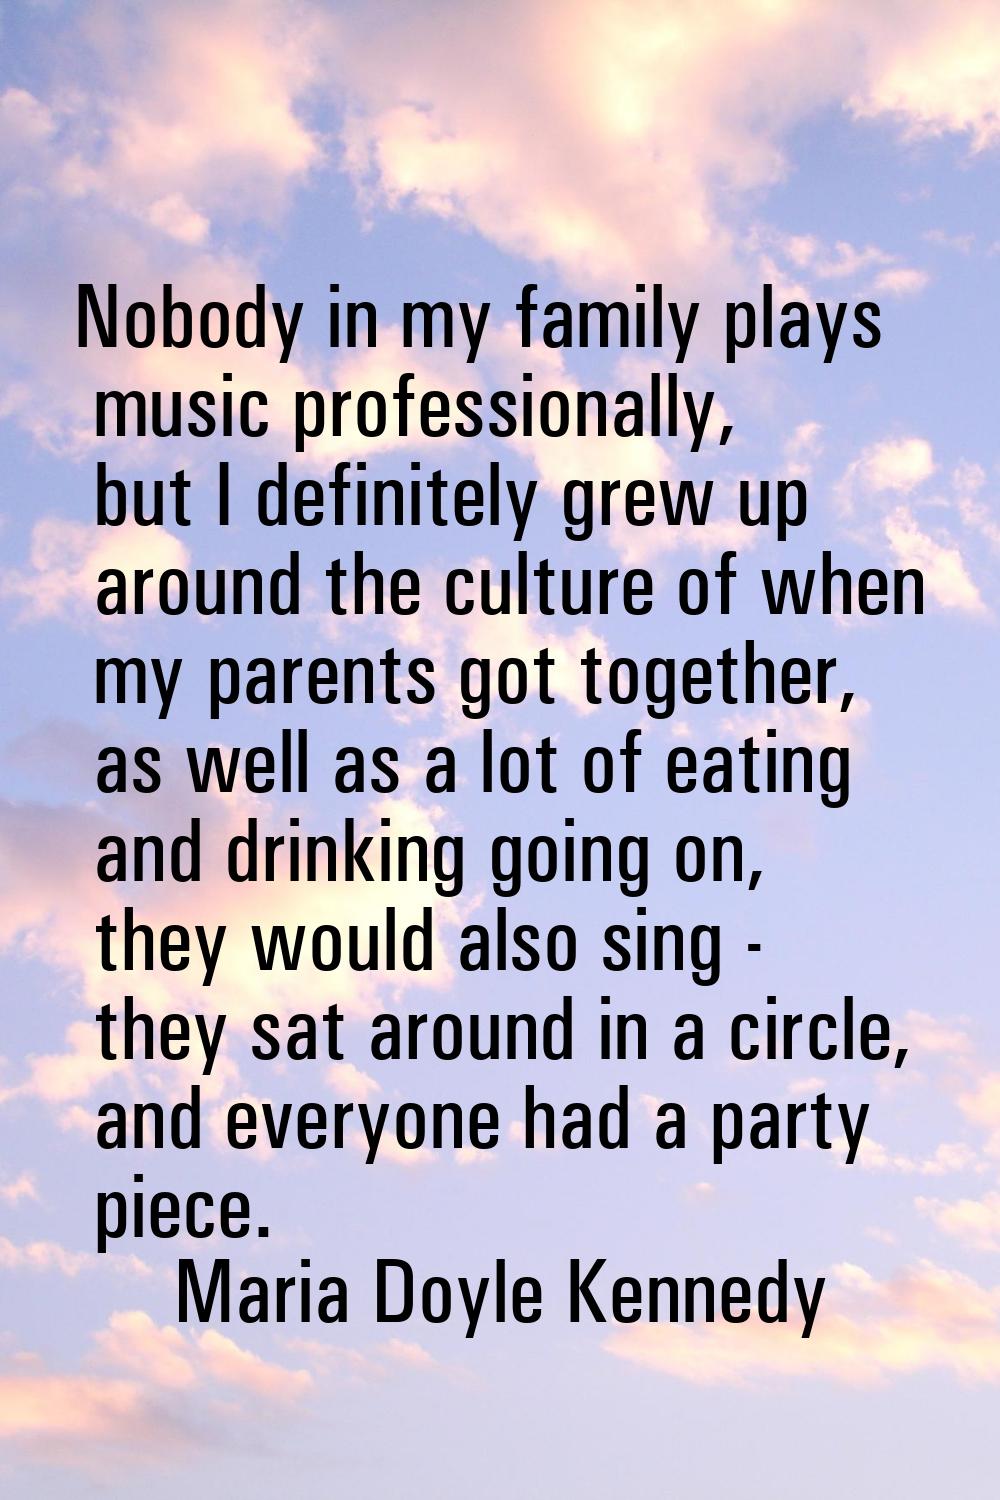 Nobody in my family plays music professionally, but I definitely grew up around the culture of when